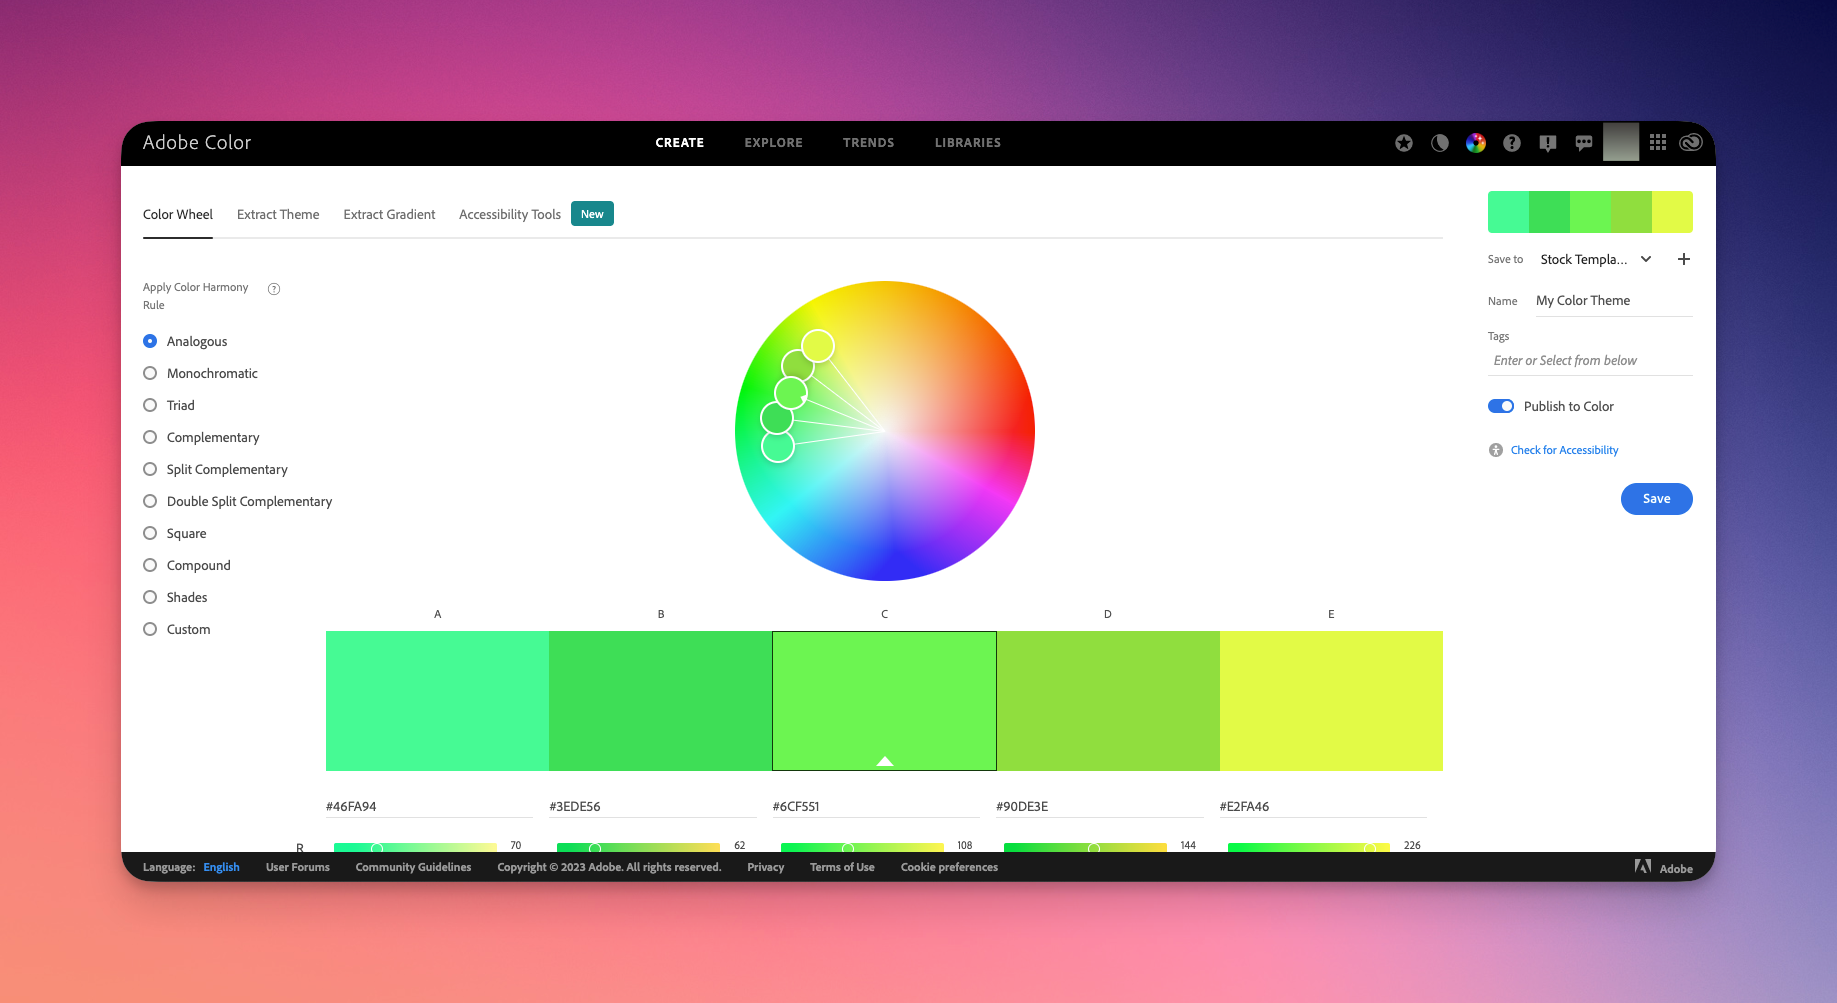 Remote.tools shows Adobe color wheel tool that can help you with creating Instagram color palette for your Instagram feed